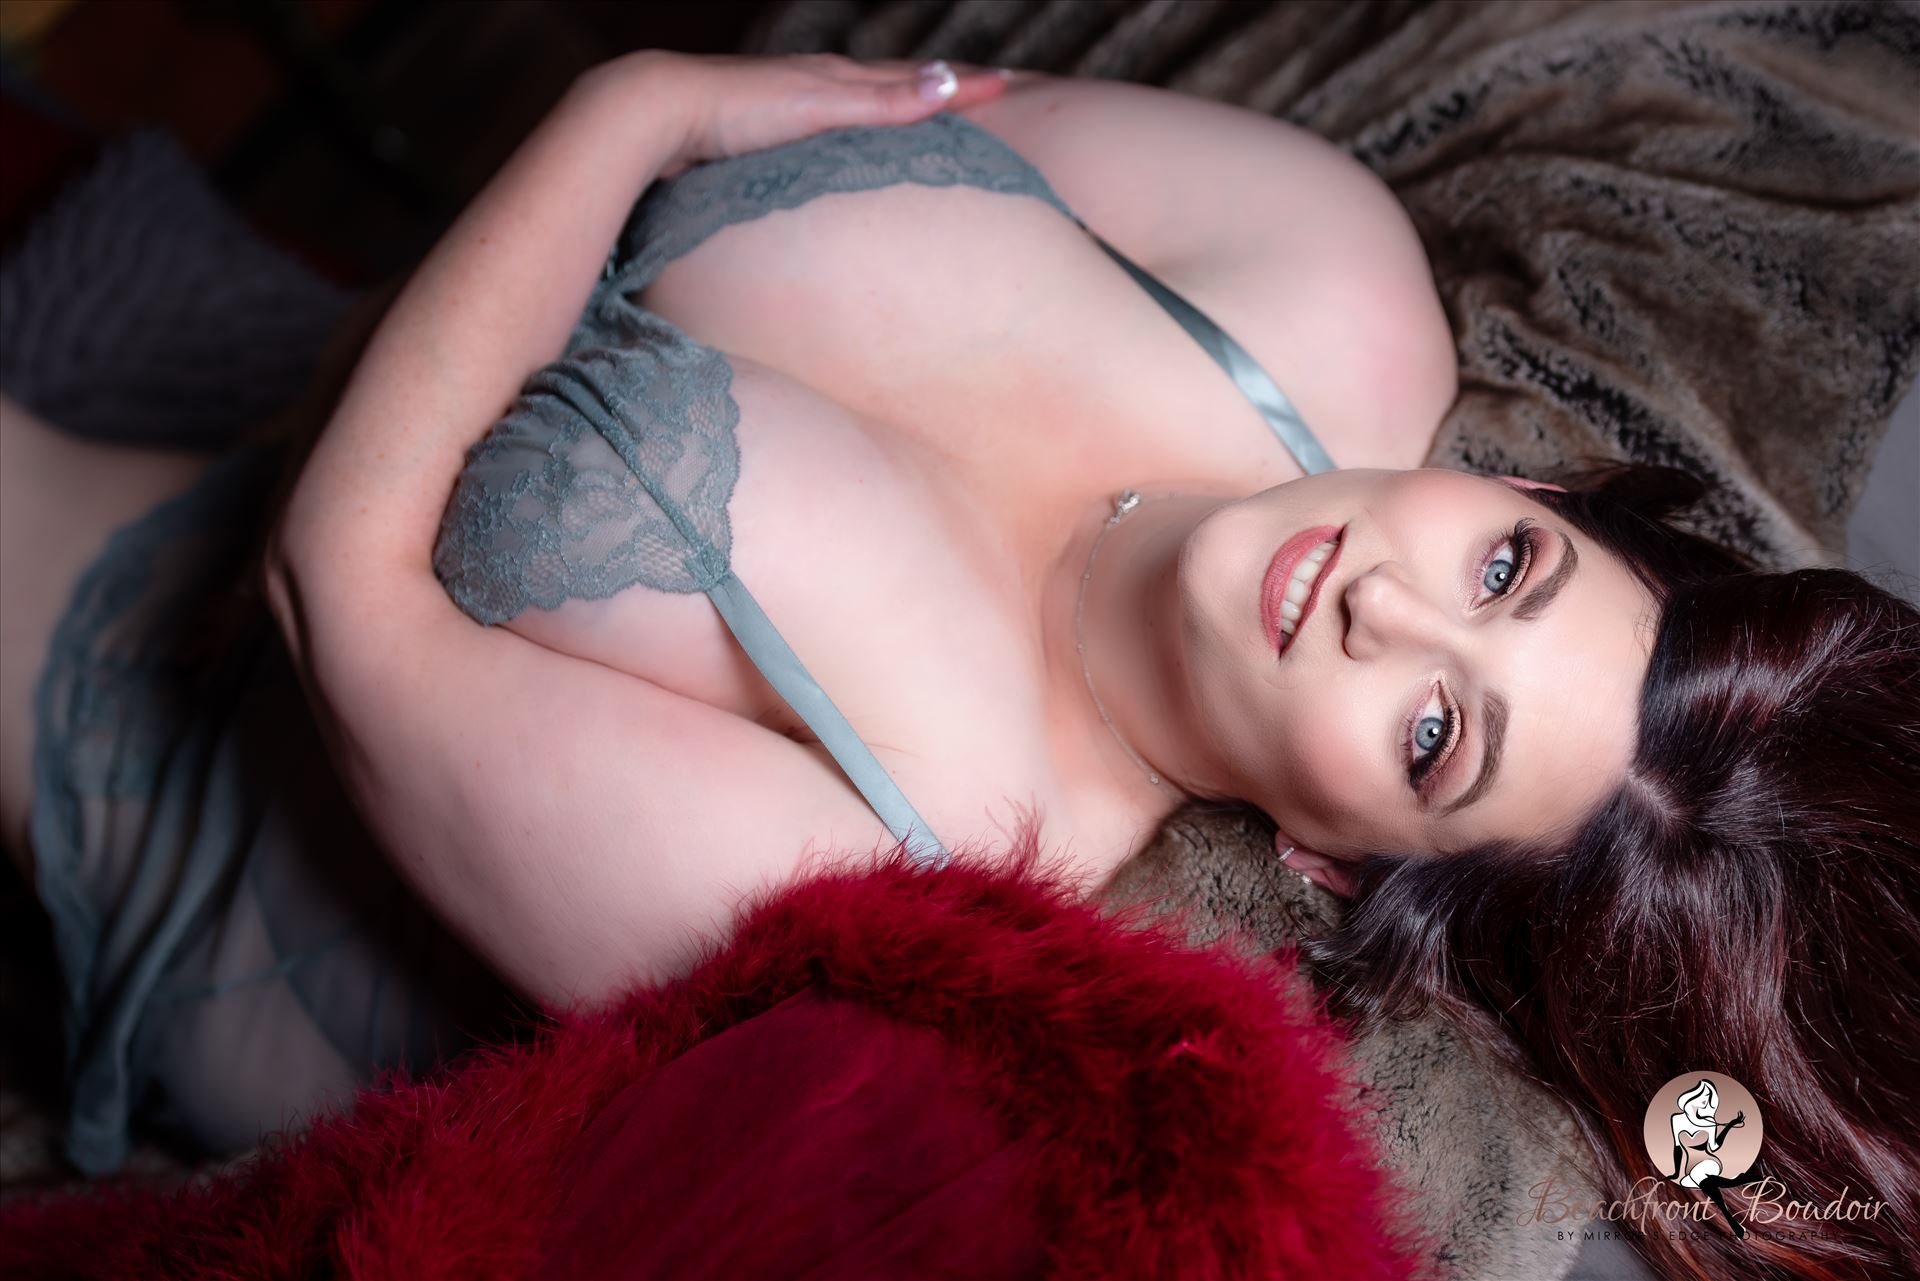 Port-.JPG - Beachfront Boudoir by Mirror's Edge Photography is a Boutique Luxury Boudoir Photography Studio located just blocks from the beach in Oceano, California. My mission is to show as many women as possible how beautiful they truly are! Curvy boudoir. by Sarah Williams